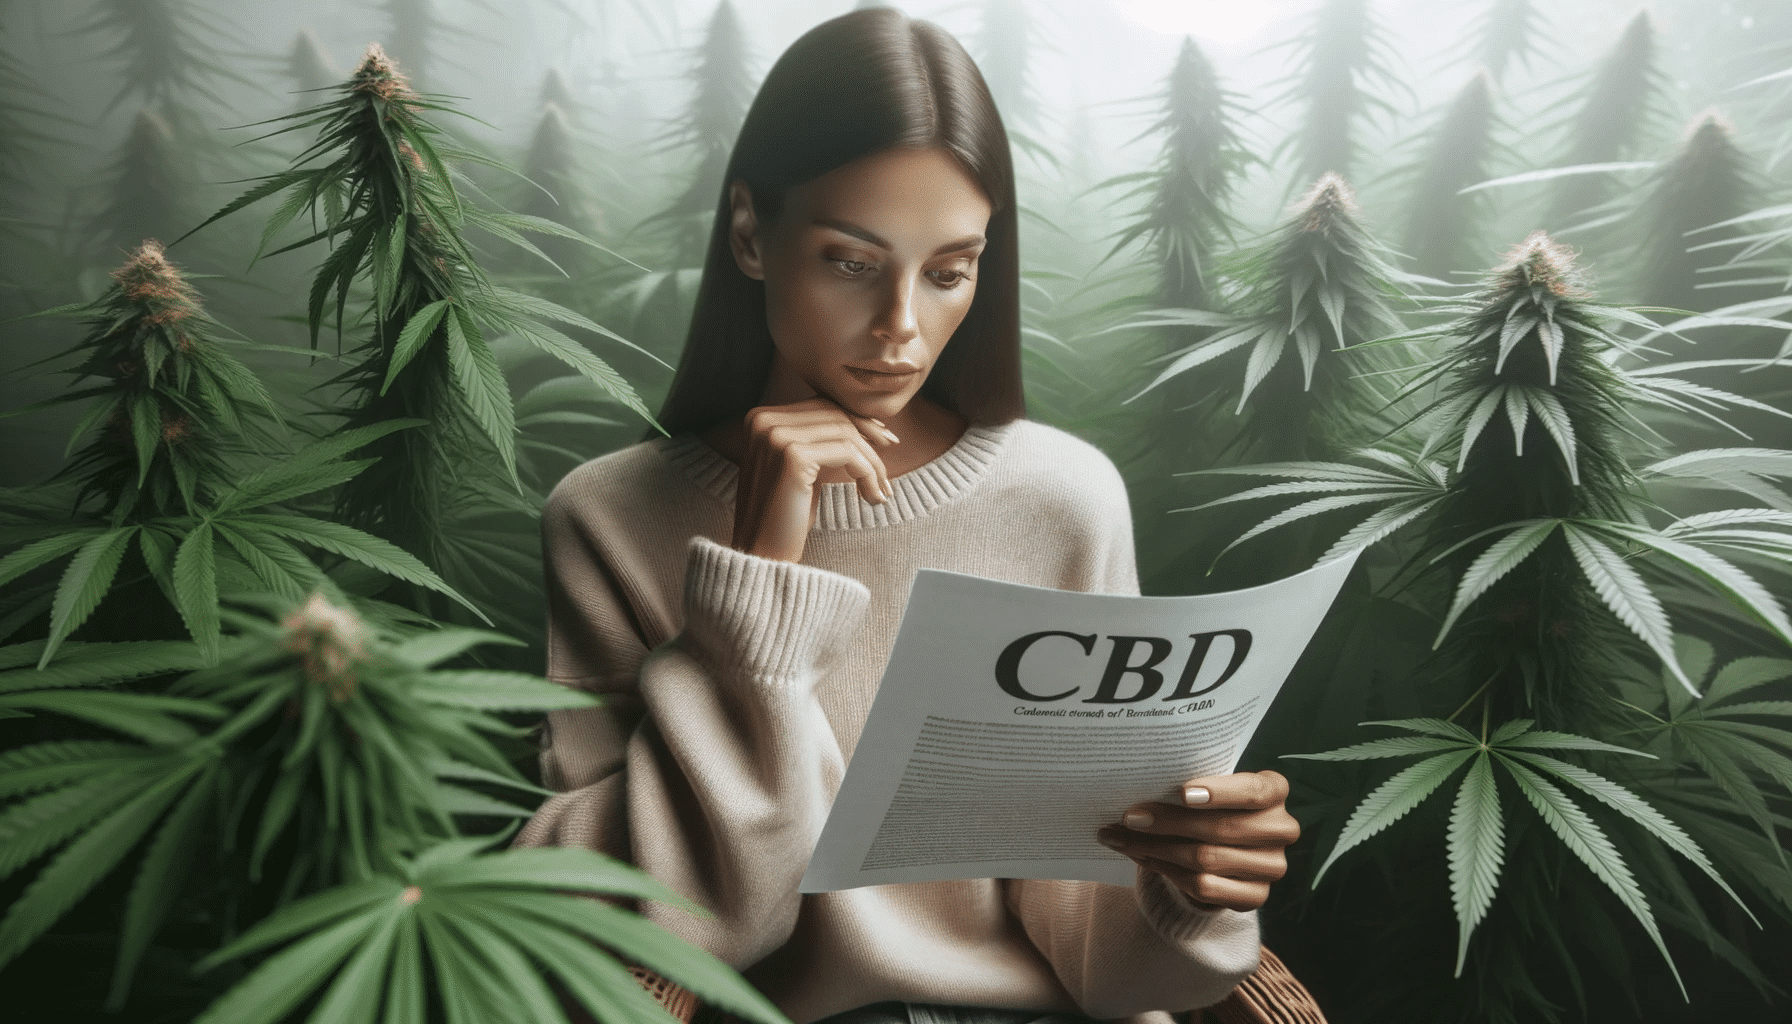 DALL·E 2023 10 14 12.56.18 Photo depicting a woman reading a research paper or pamphlet about CBD with a backdrop of hemp plants. The scene focuses on her contemplative